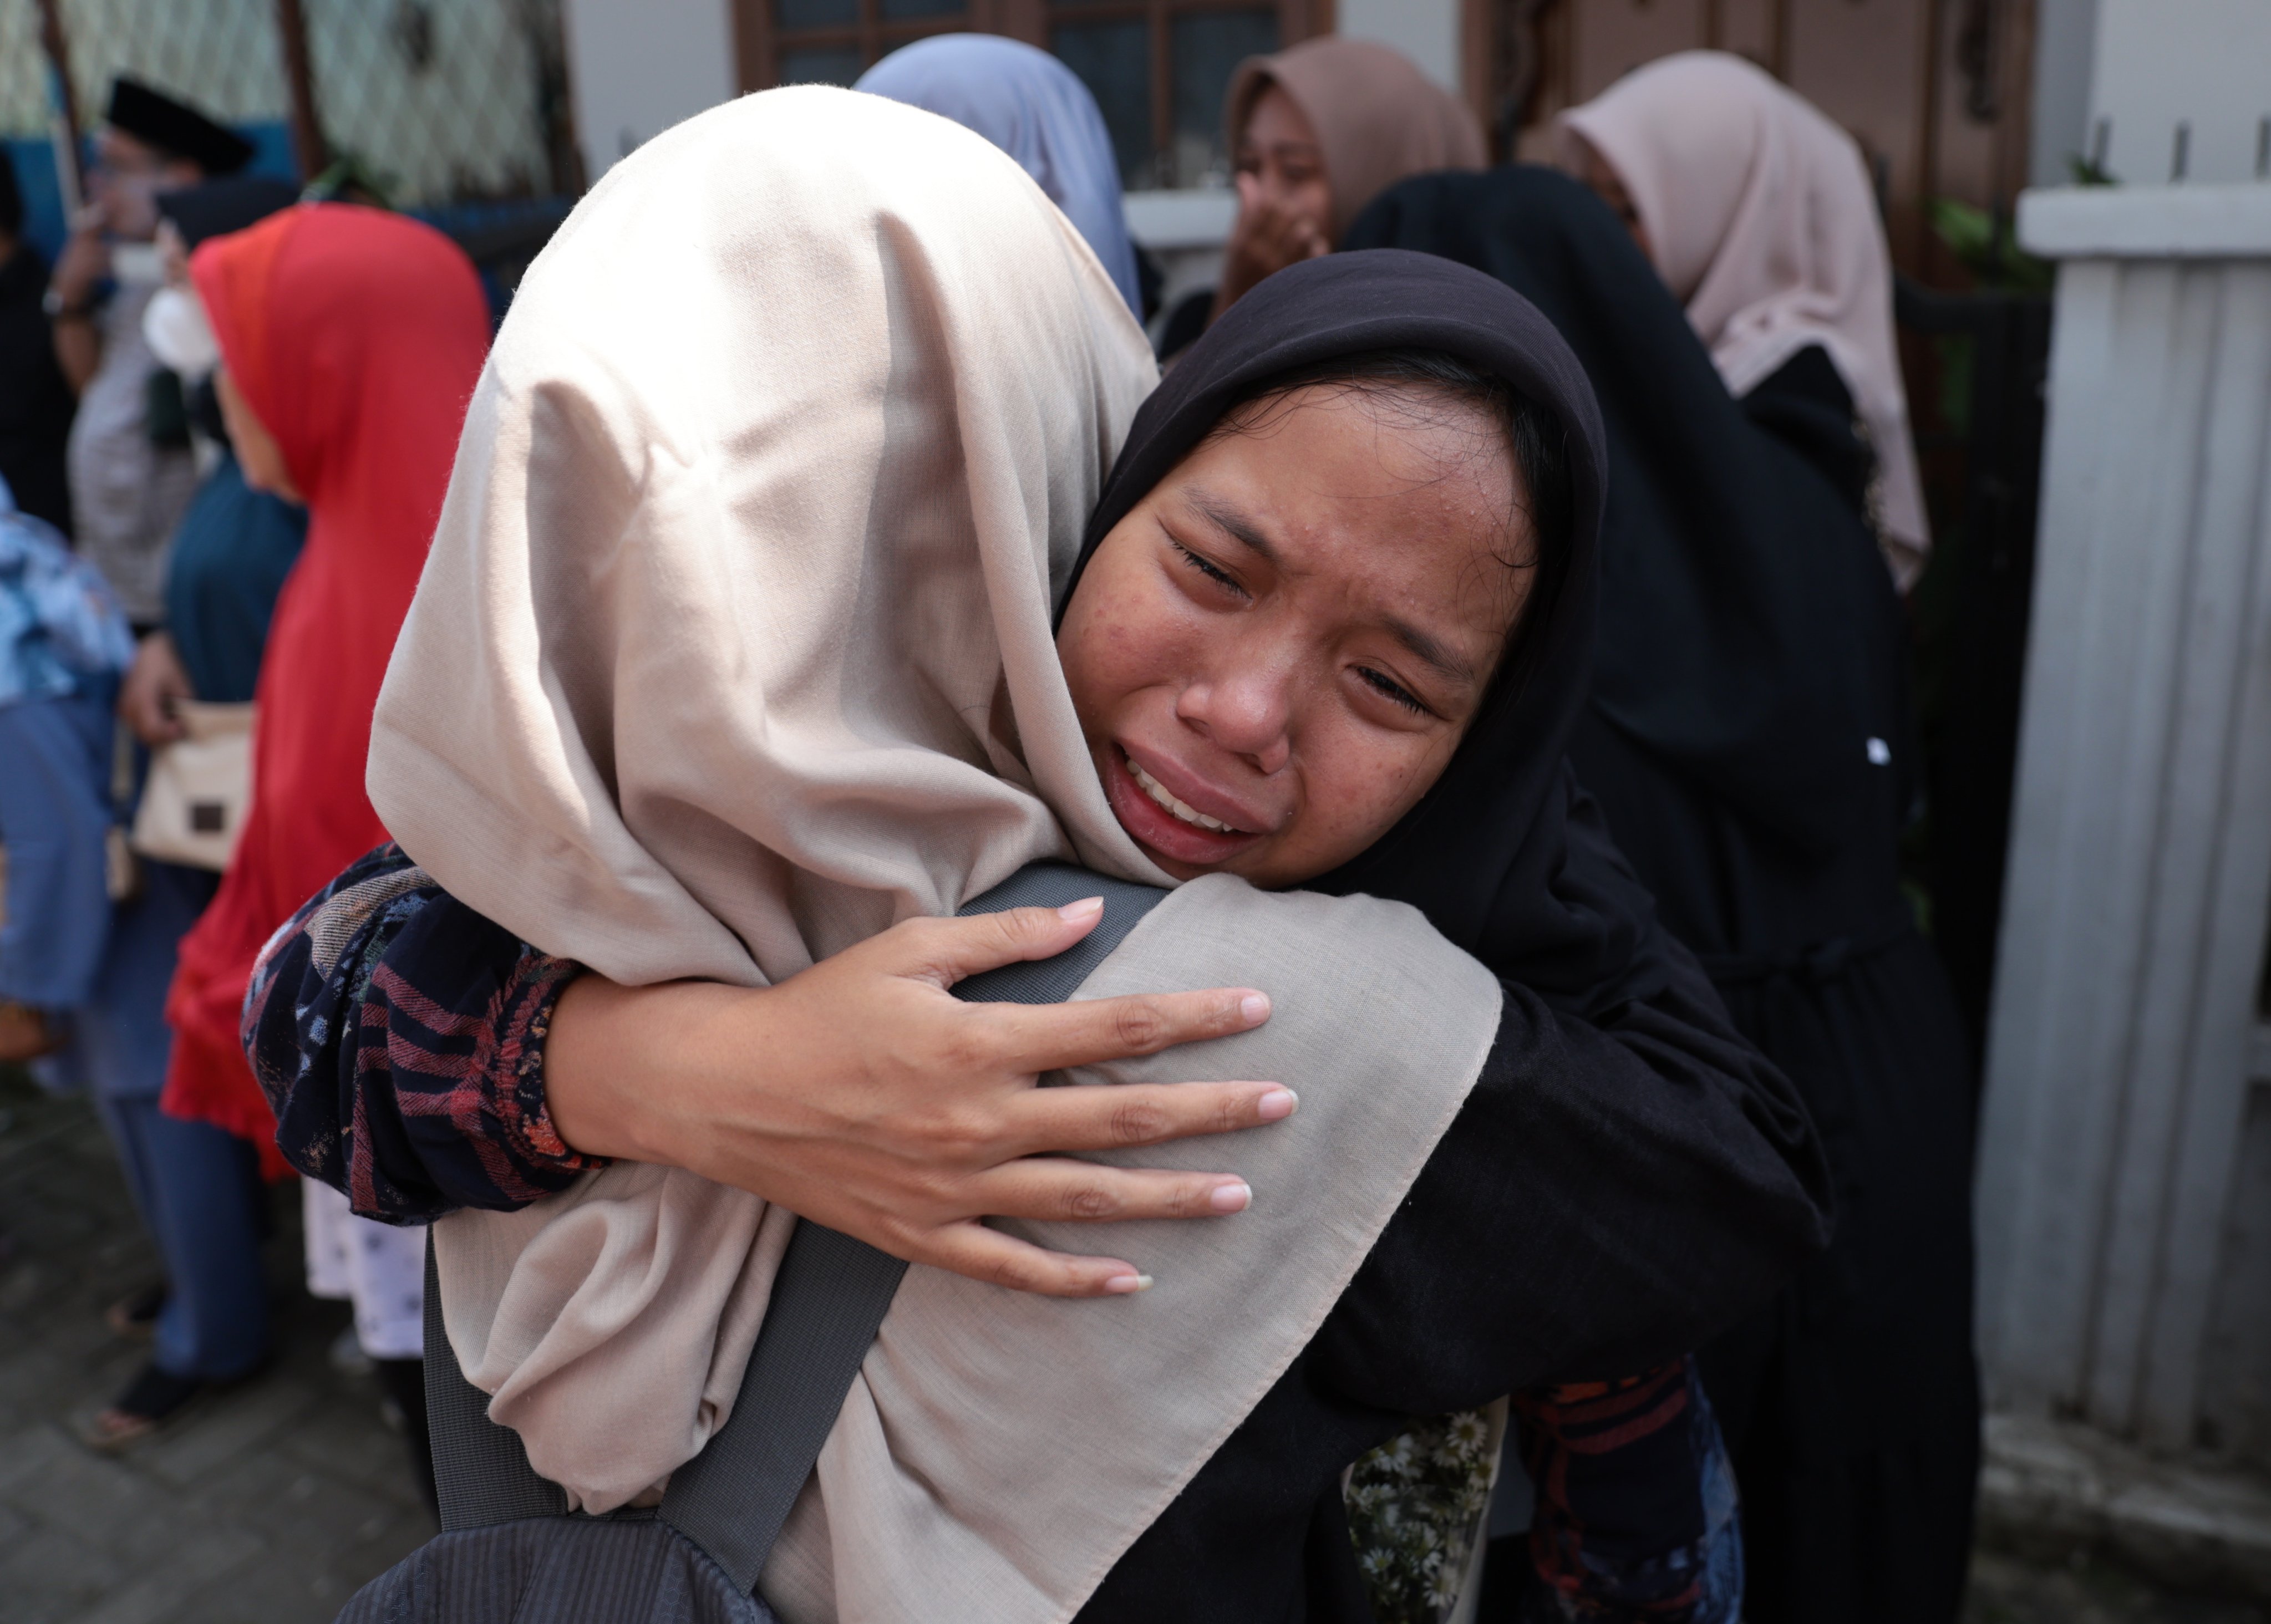 Relatives of bus crash victims cry before a funeral in Depok, Indonesia, on Sunday. Photo: EPA-EFE